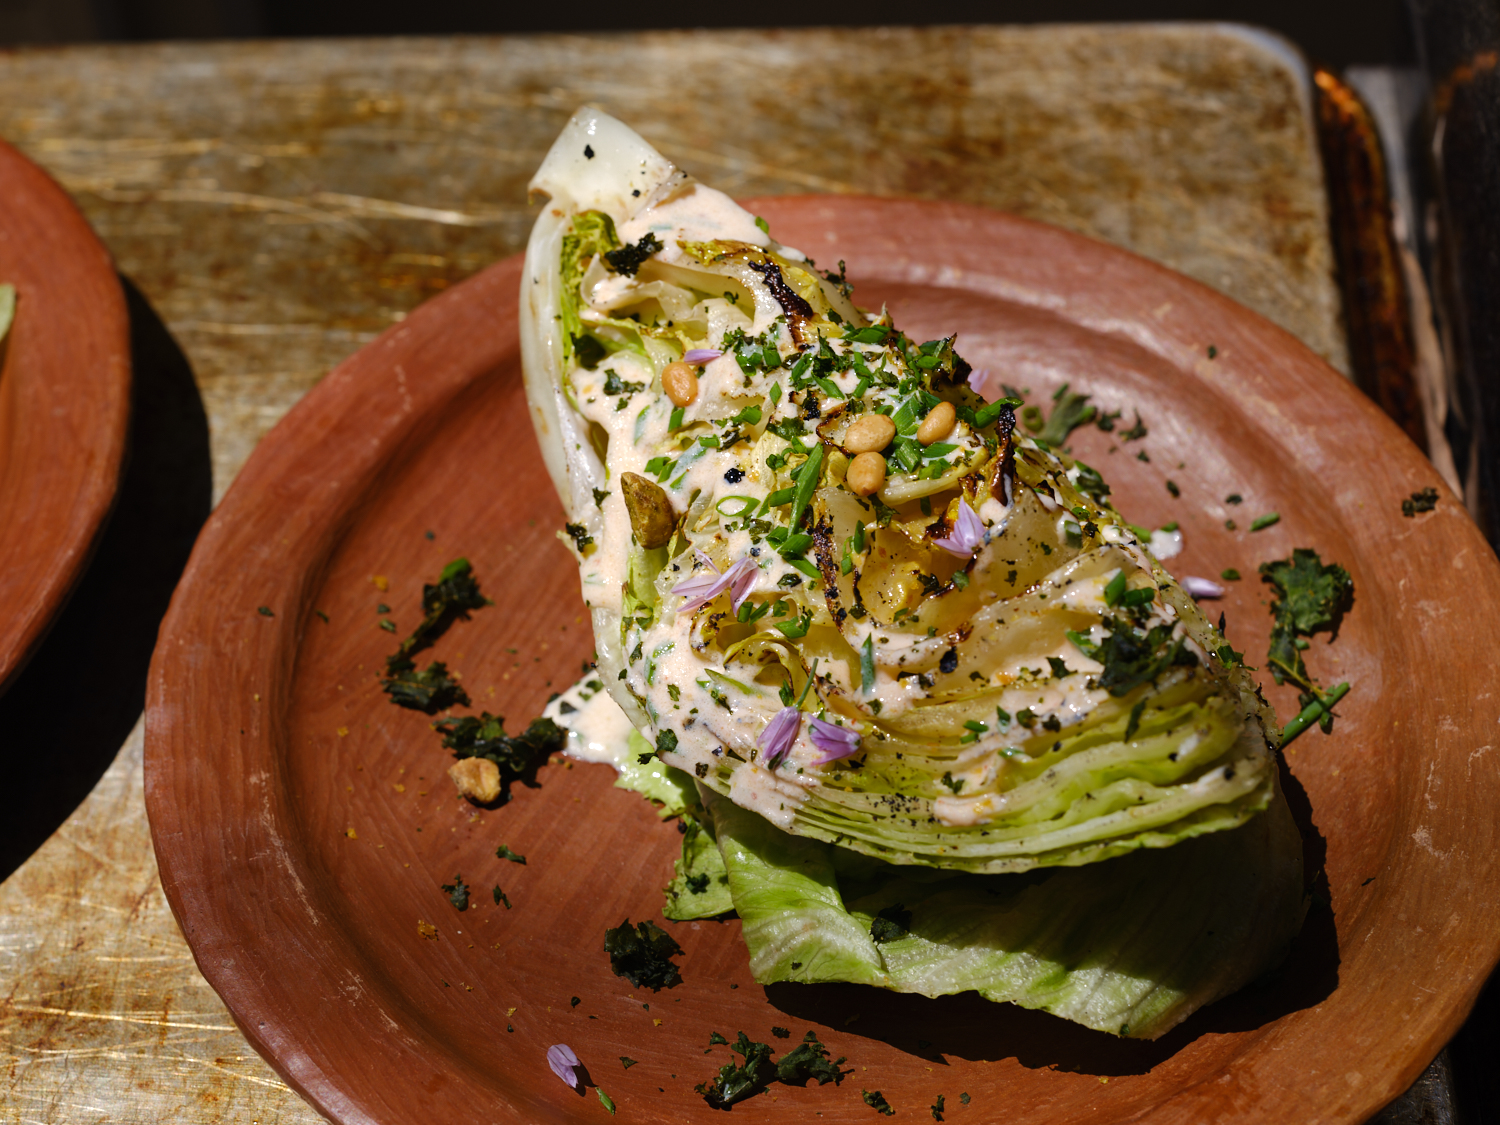 wedge salad recipe with ranch dressing